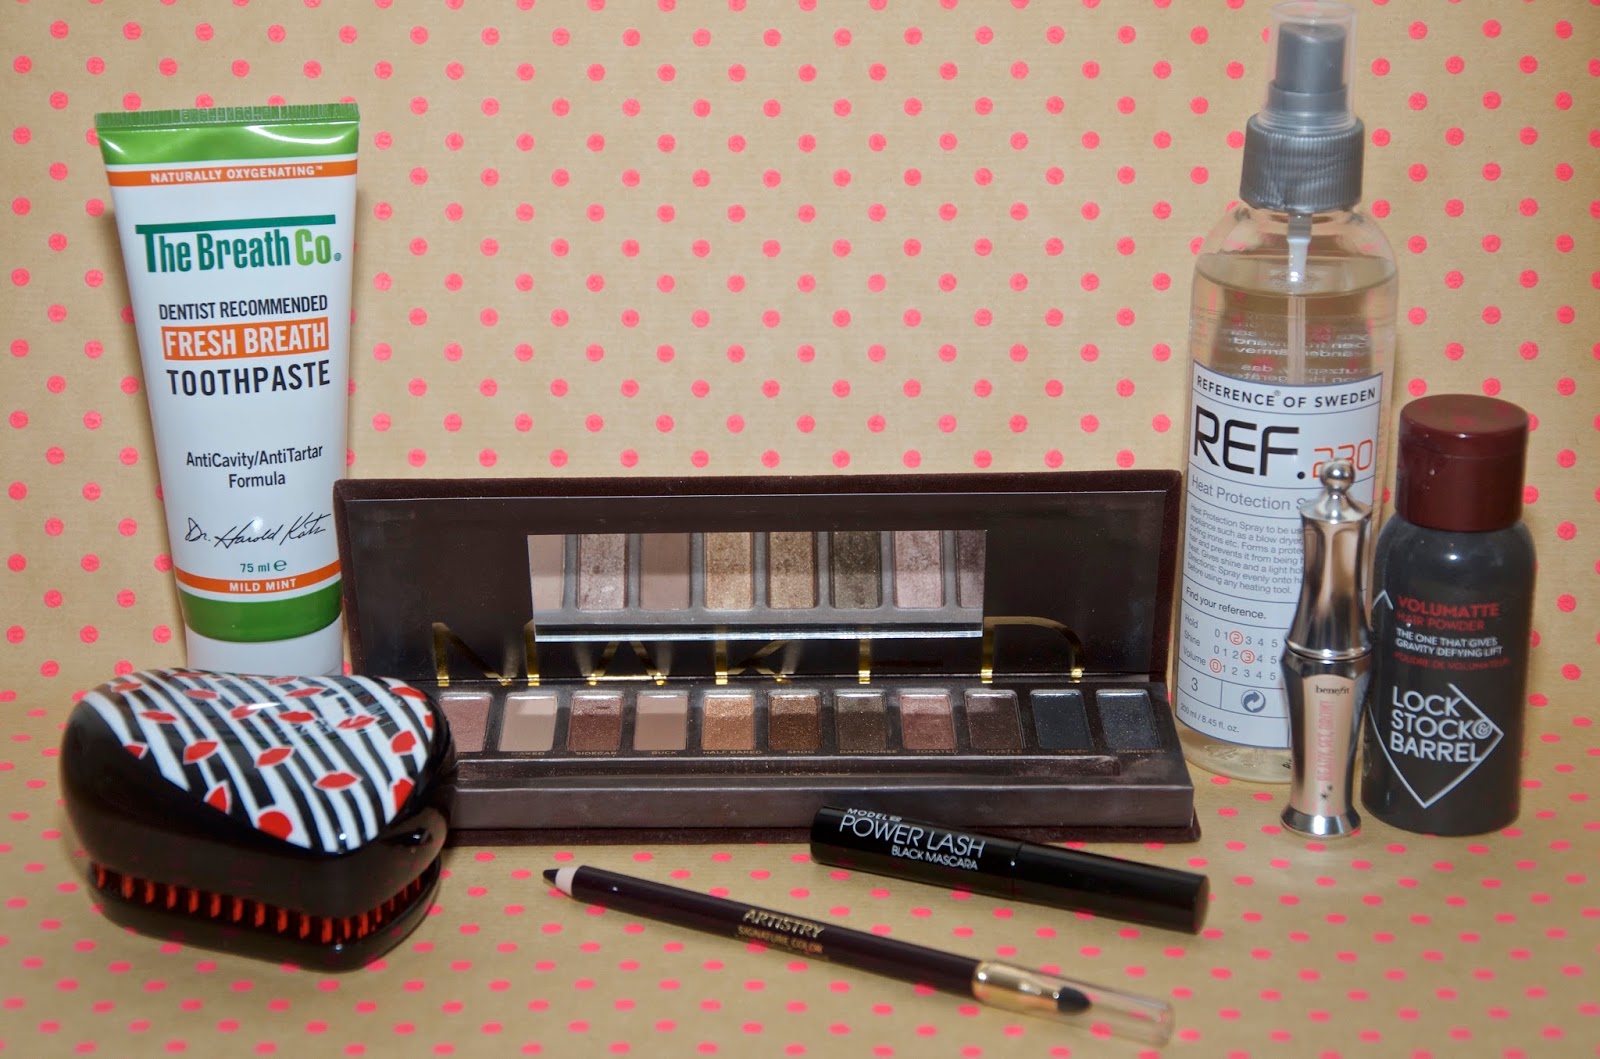 Beauty products, toothpaste, tangle teazer, Urban Decay Naked Palette, Mascara, Haircare, eyeliner